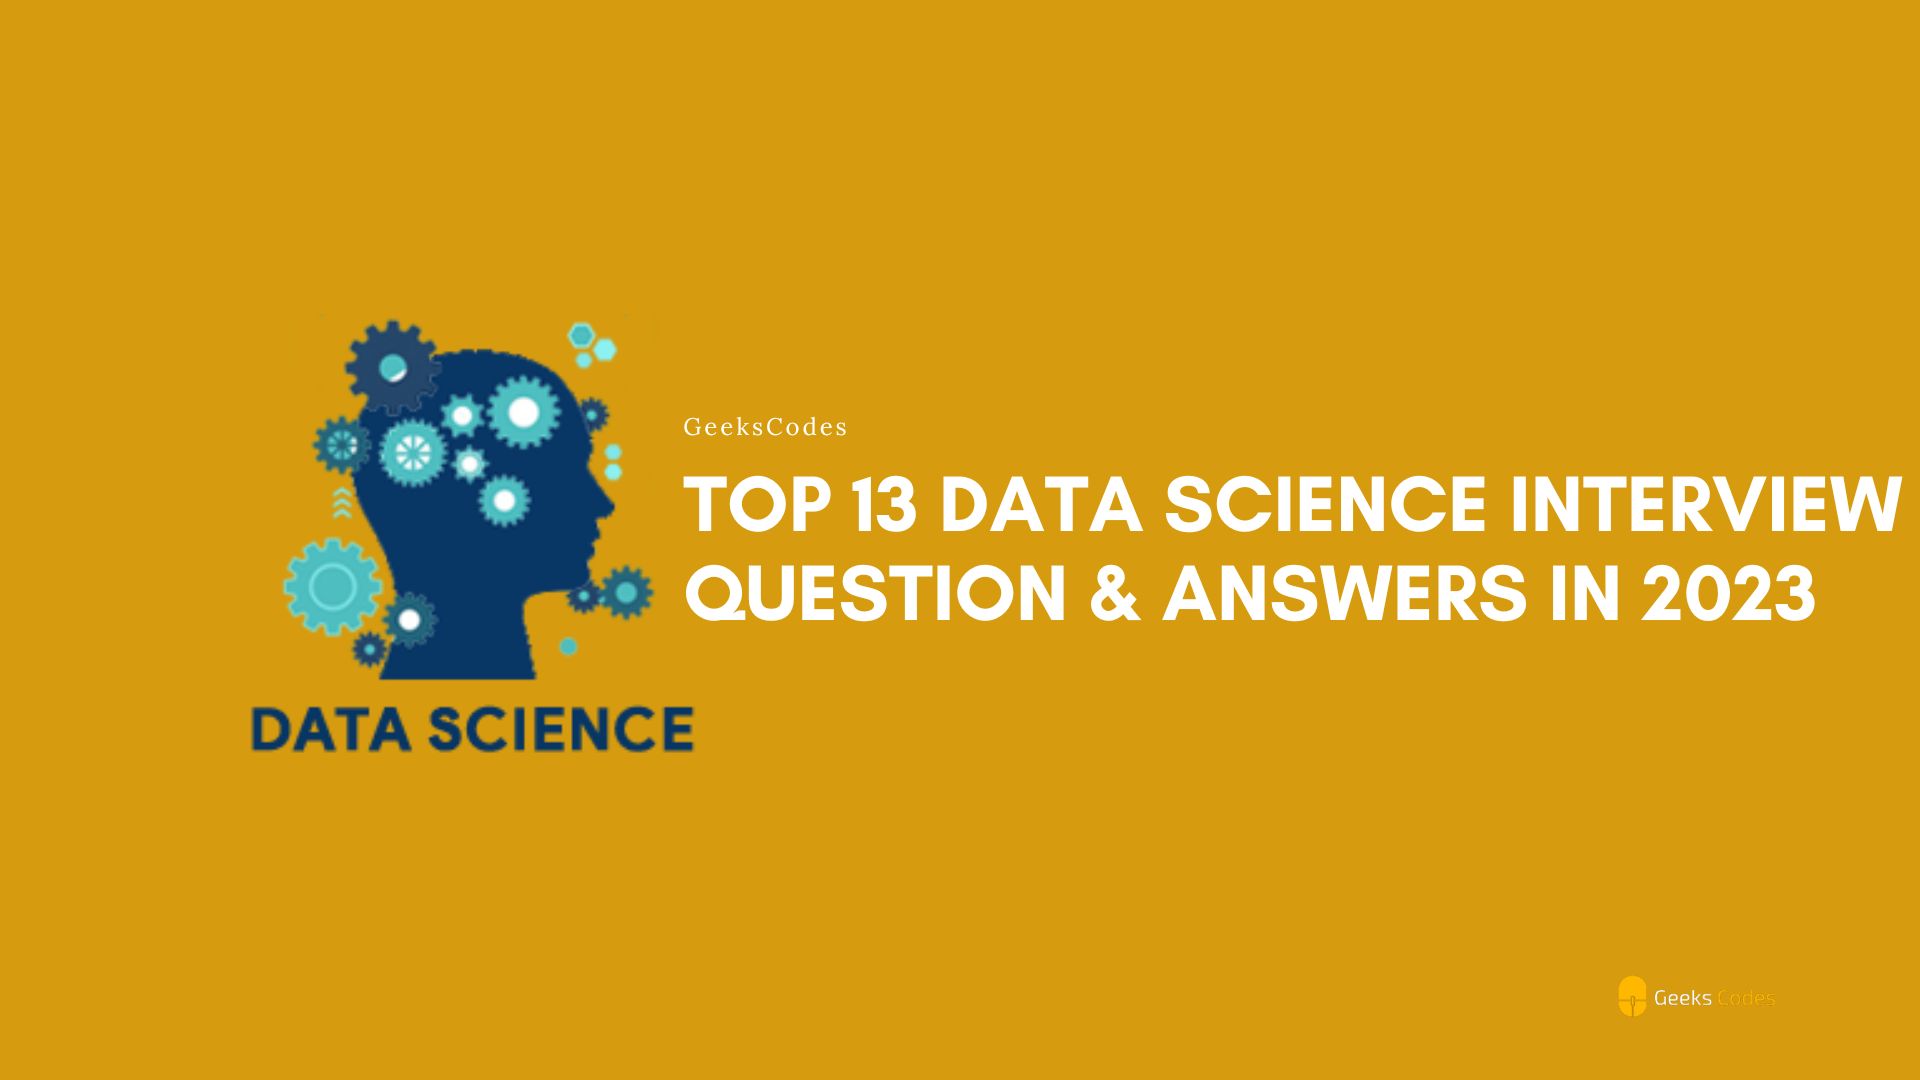 Top 13 Data Science Interview Question & Answers In 2023